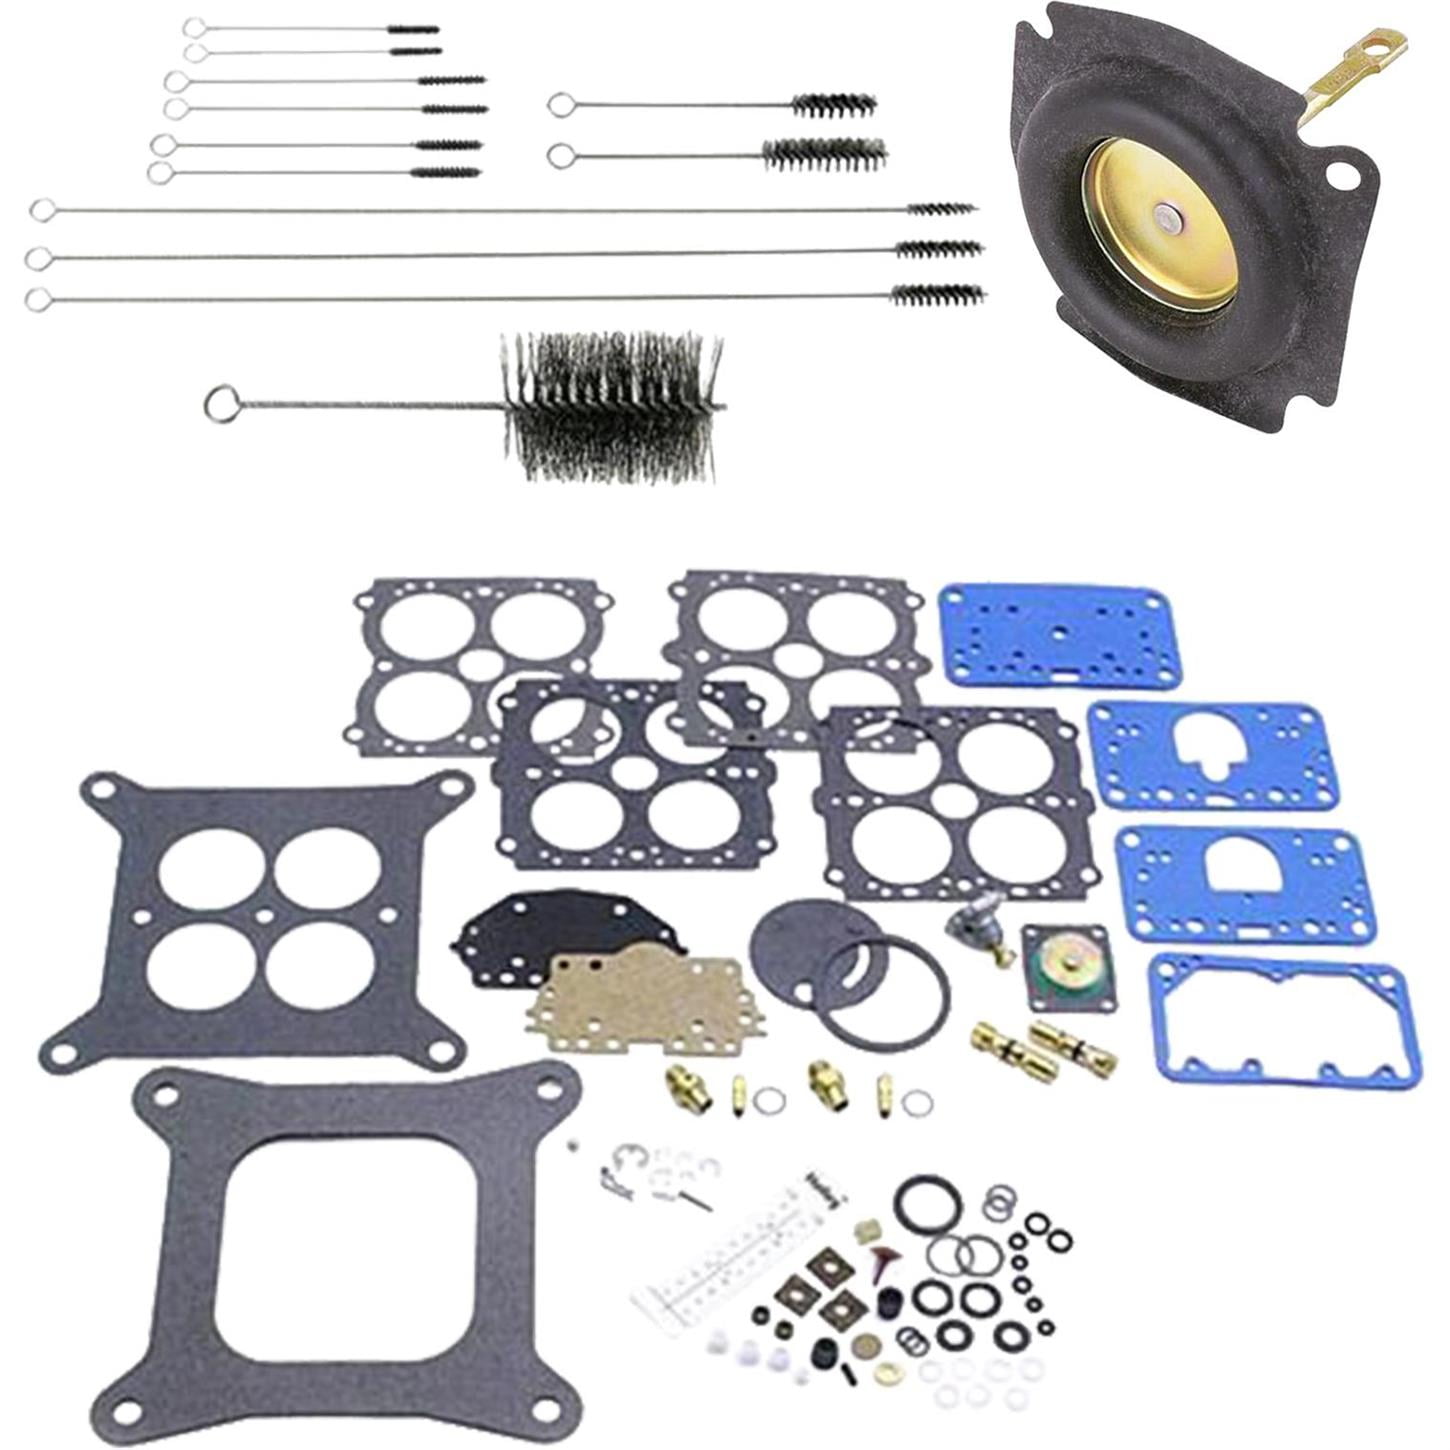 Holley 37-119 4160 4BBL 600CFM Carb Rebuild Kit/Cleaning Brushes